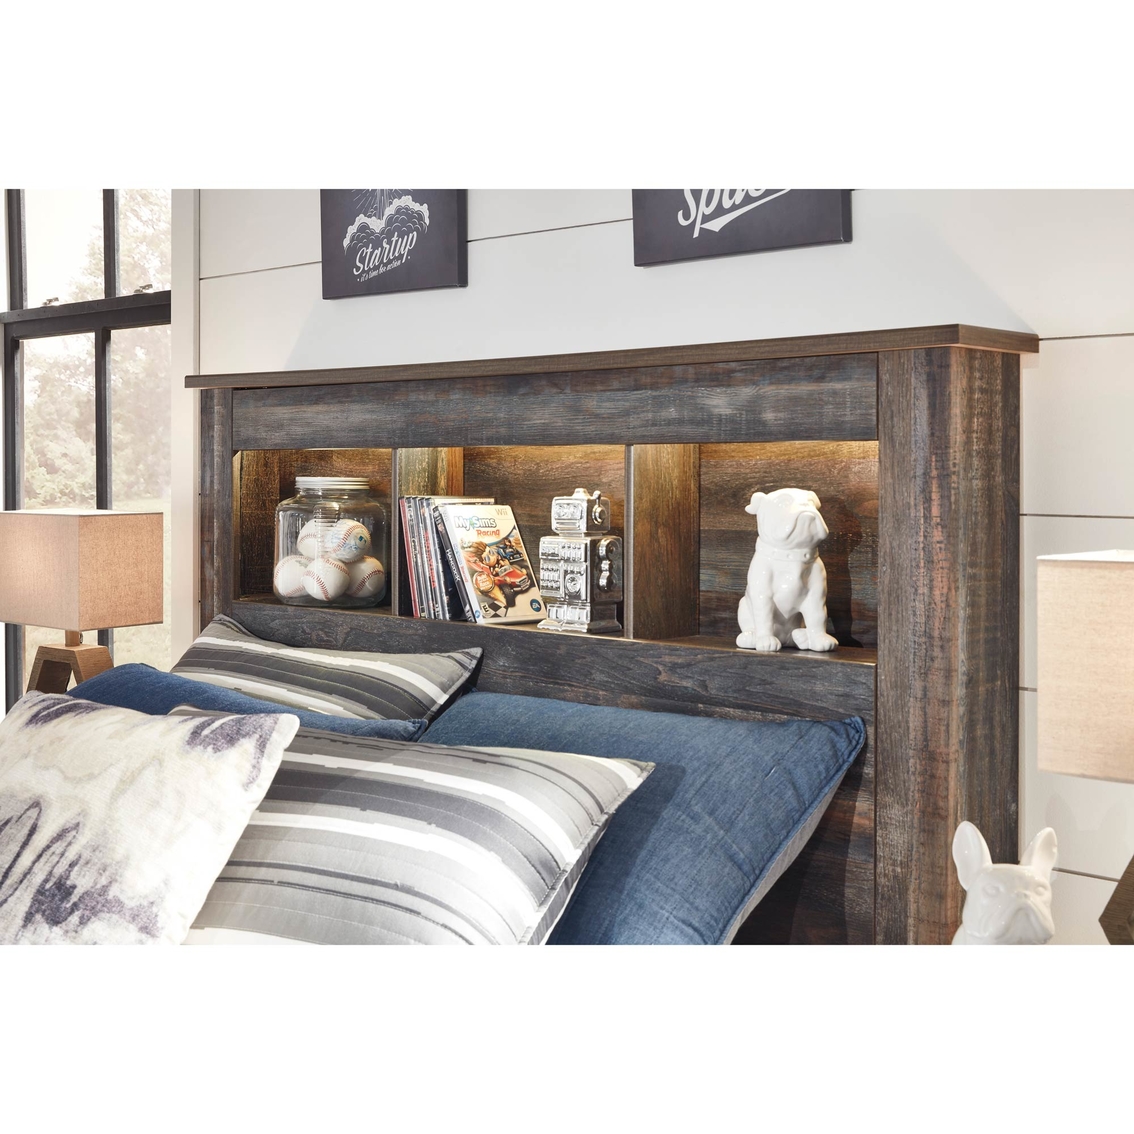 Signature Design by Ashley Drystan Bookcase Headboard Bed with 2 Side Storage Units - Image 7 of 8